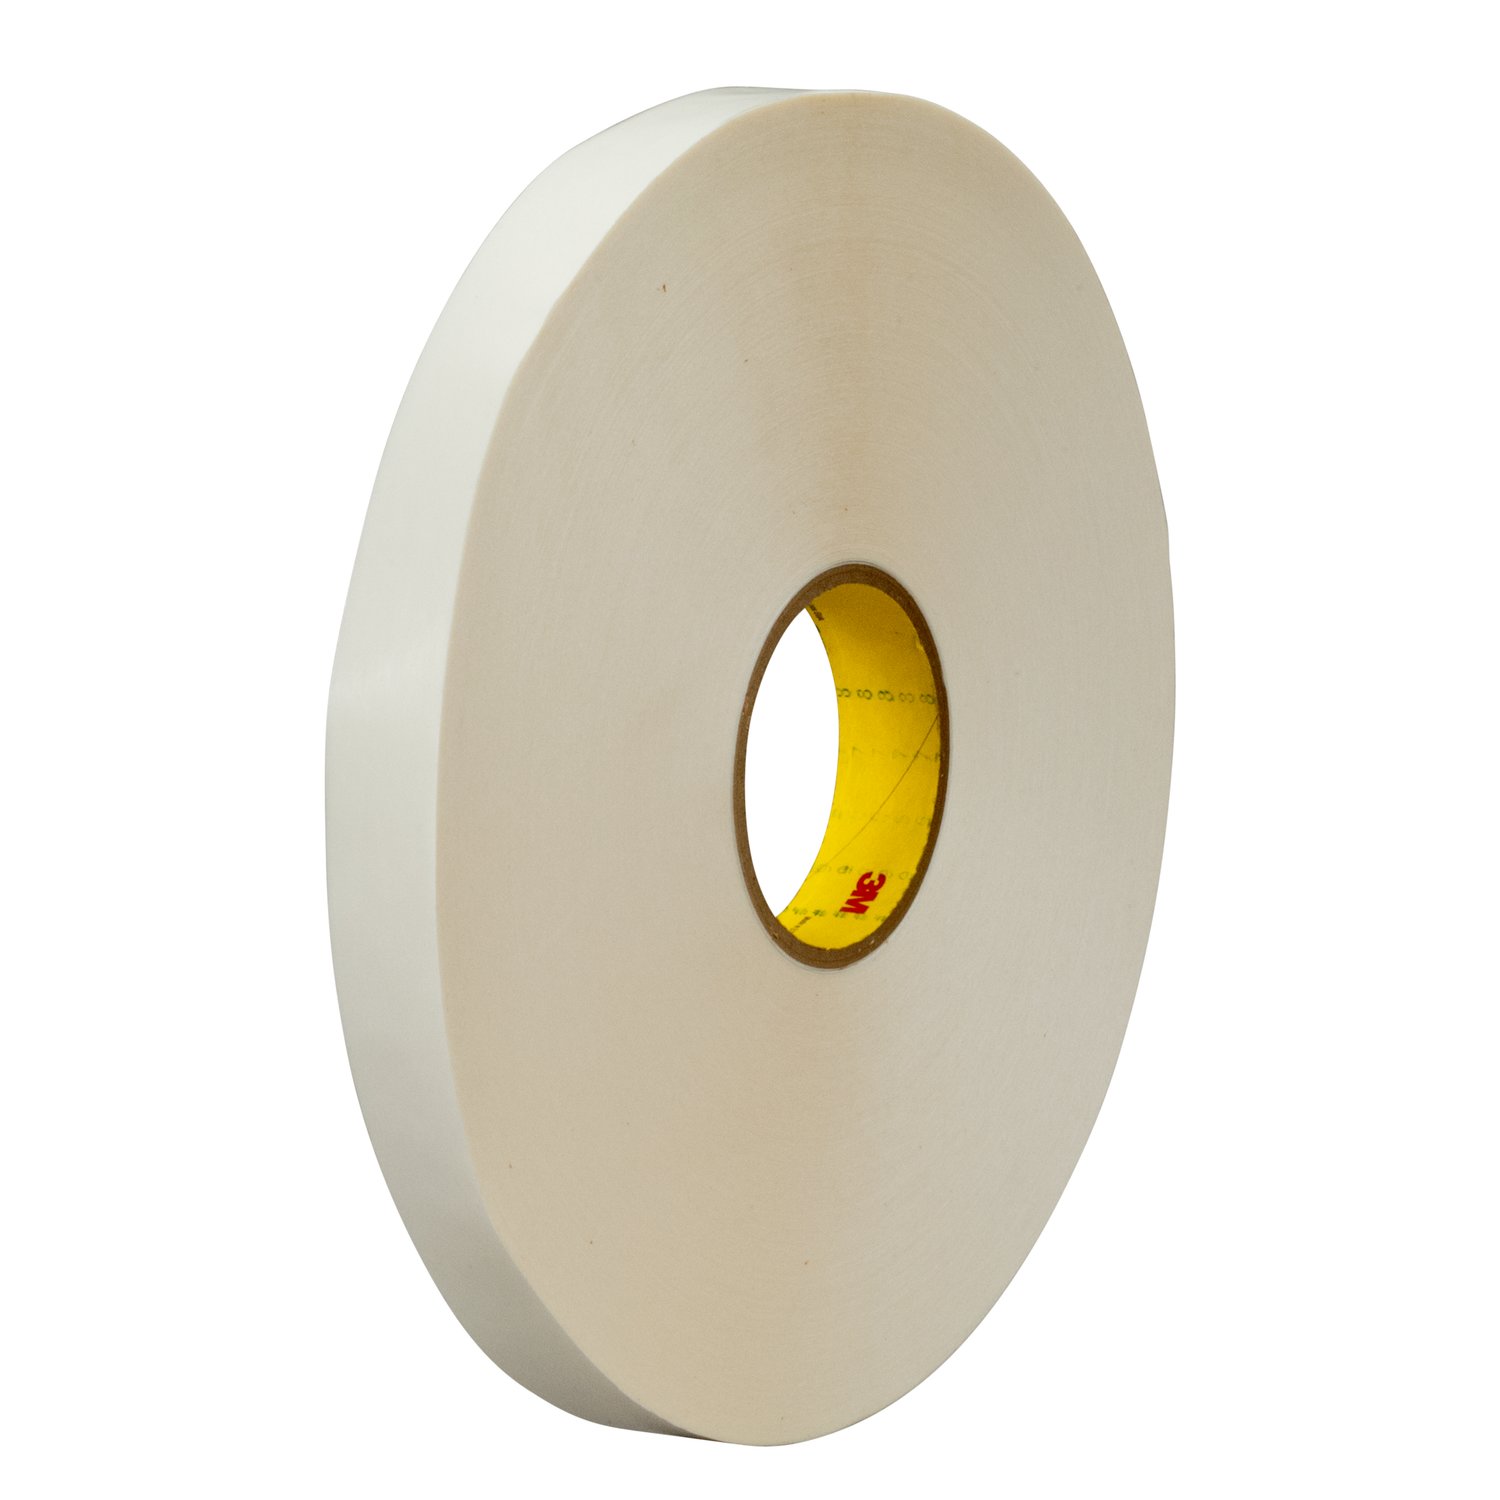 7100012782 - 3M Double Coated Tape 9578, 4 mil, Roll, Config